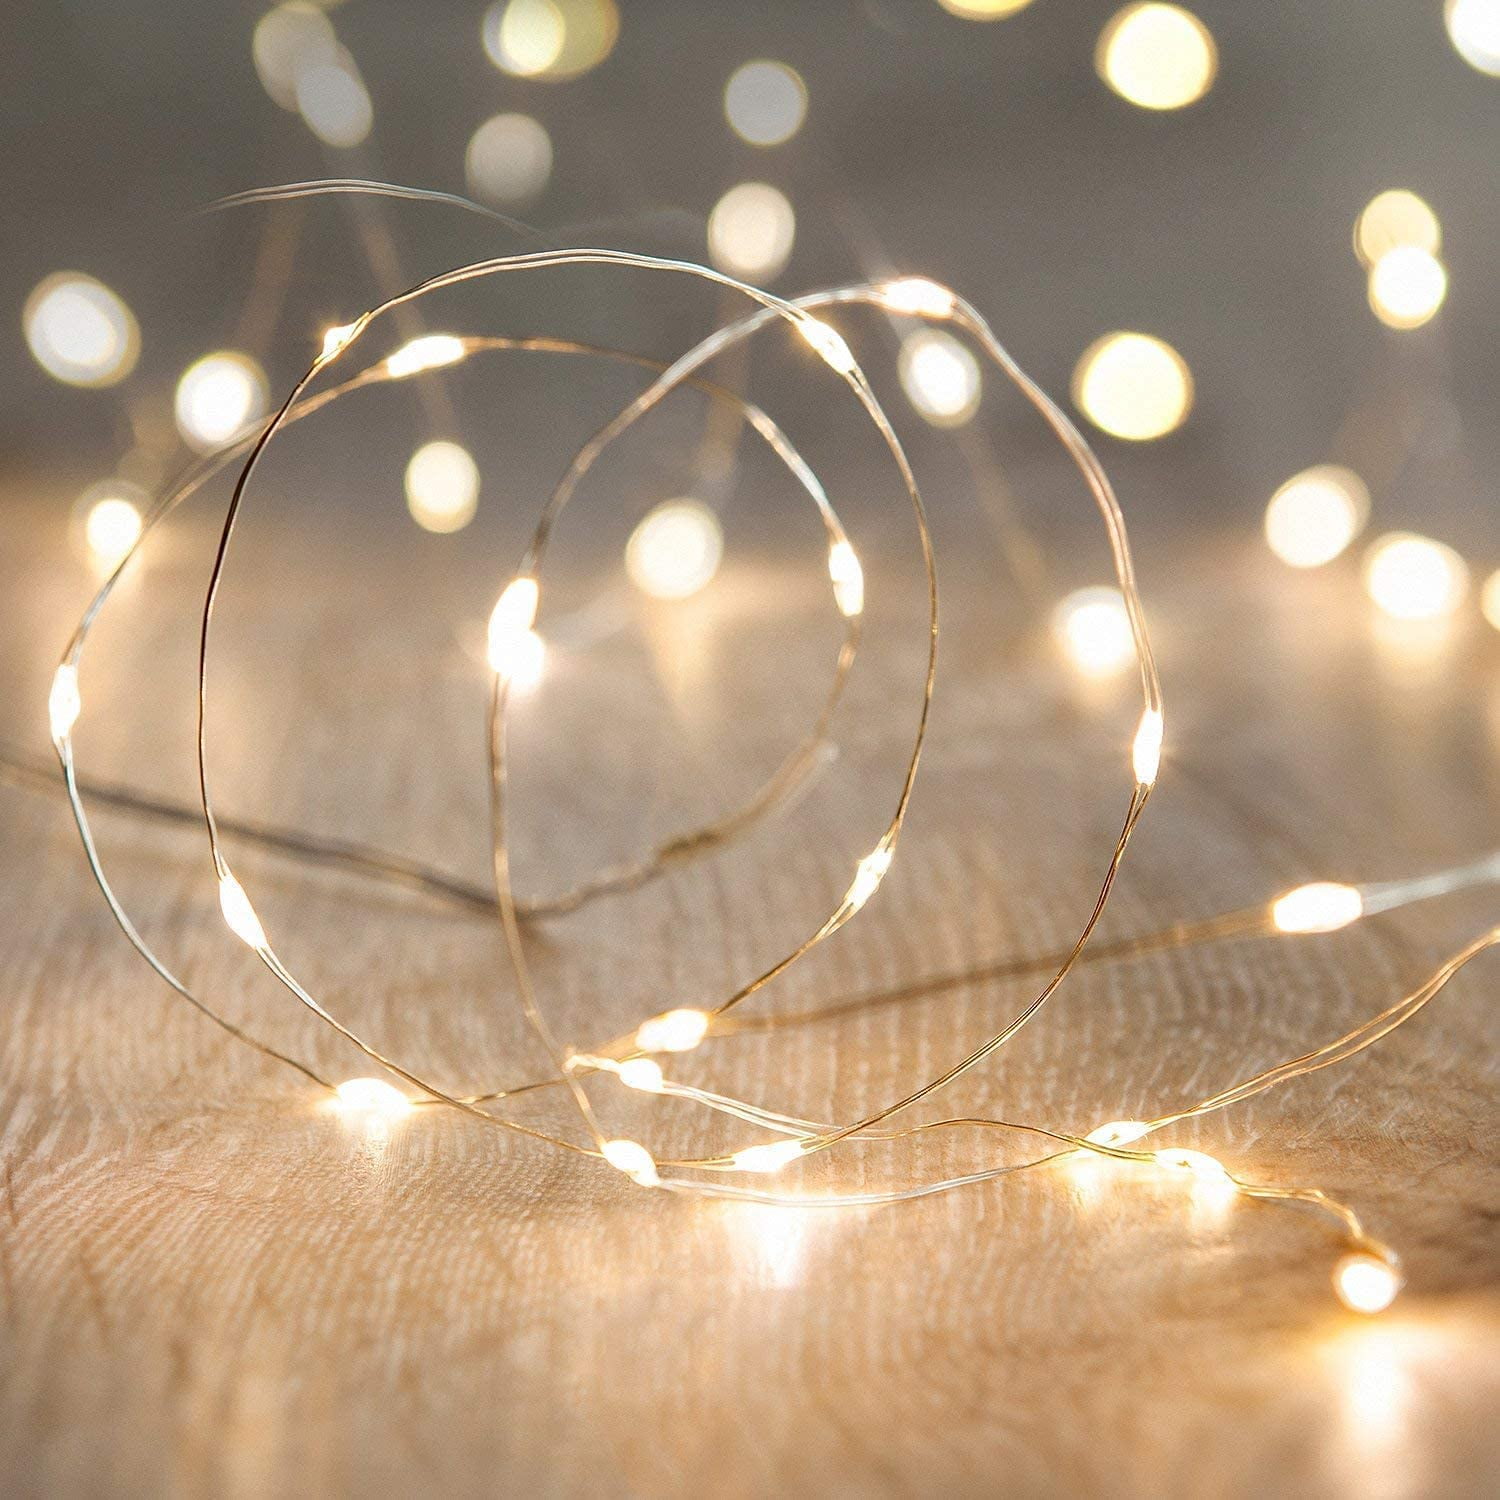 30 LEDs Battery Operated Mini LED Copper Wire String Fairy Lights 3M Warm White 